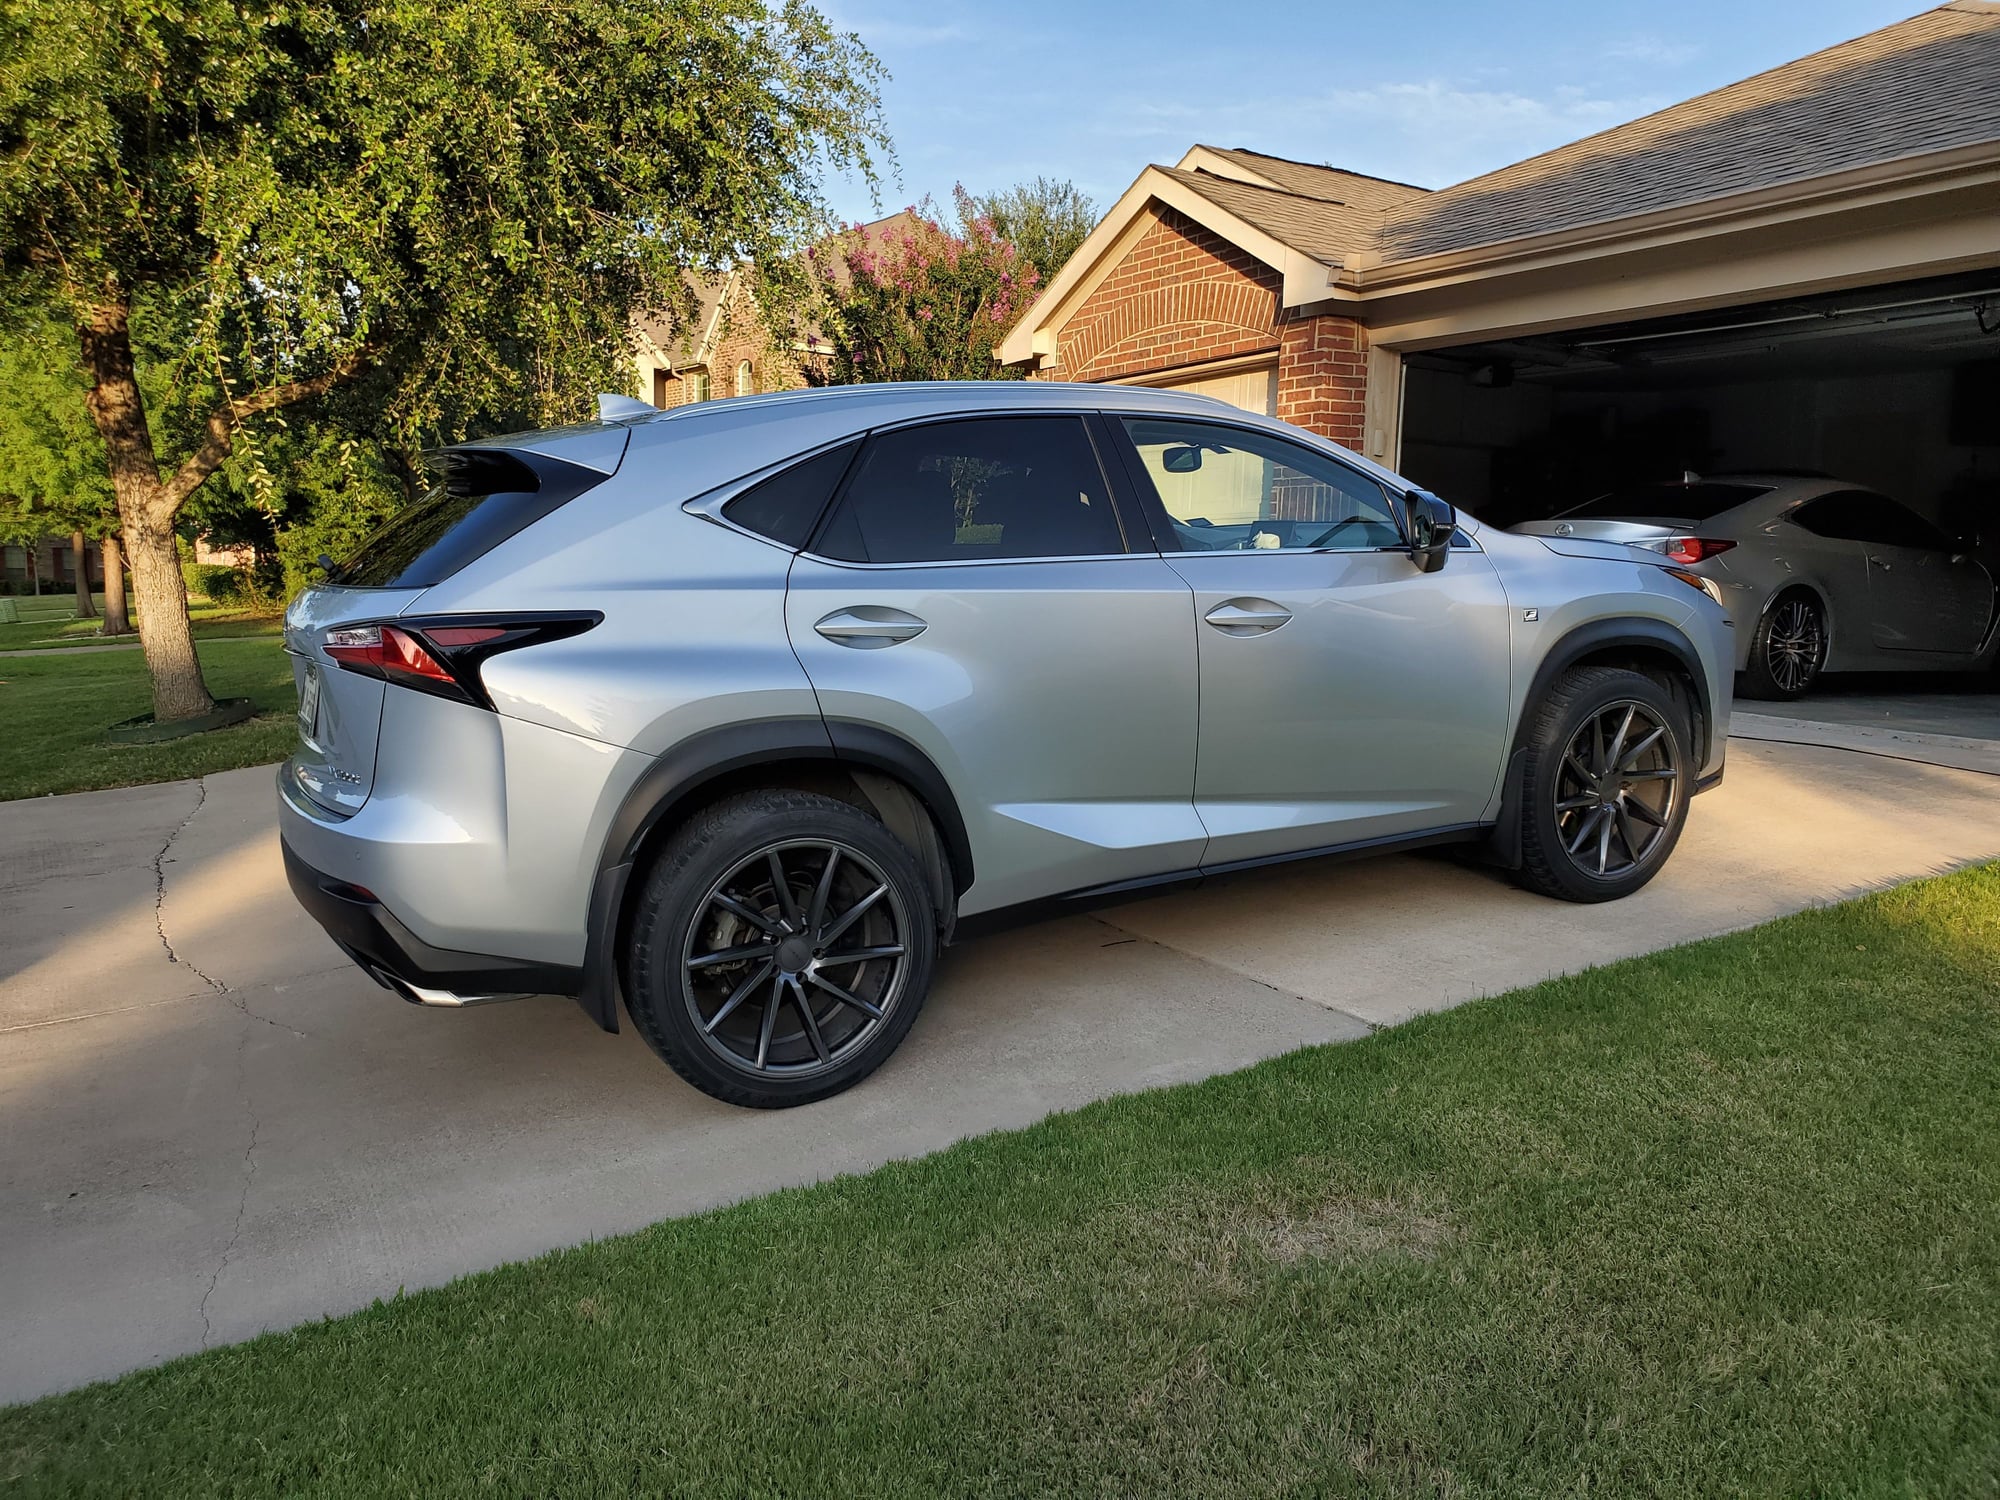 2015 Lexus NX200t - 2015 Lexus NX200t F-Sport, Silver, Excellent Condition, 42k miles - Used - VIN JTYARBZ6F2007027 - 42,500 Miles - 4 cyl - 2WD - Automatic - SUV - Silver - Grand Prairie, TX 75052, United States